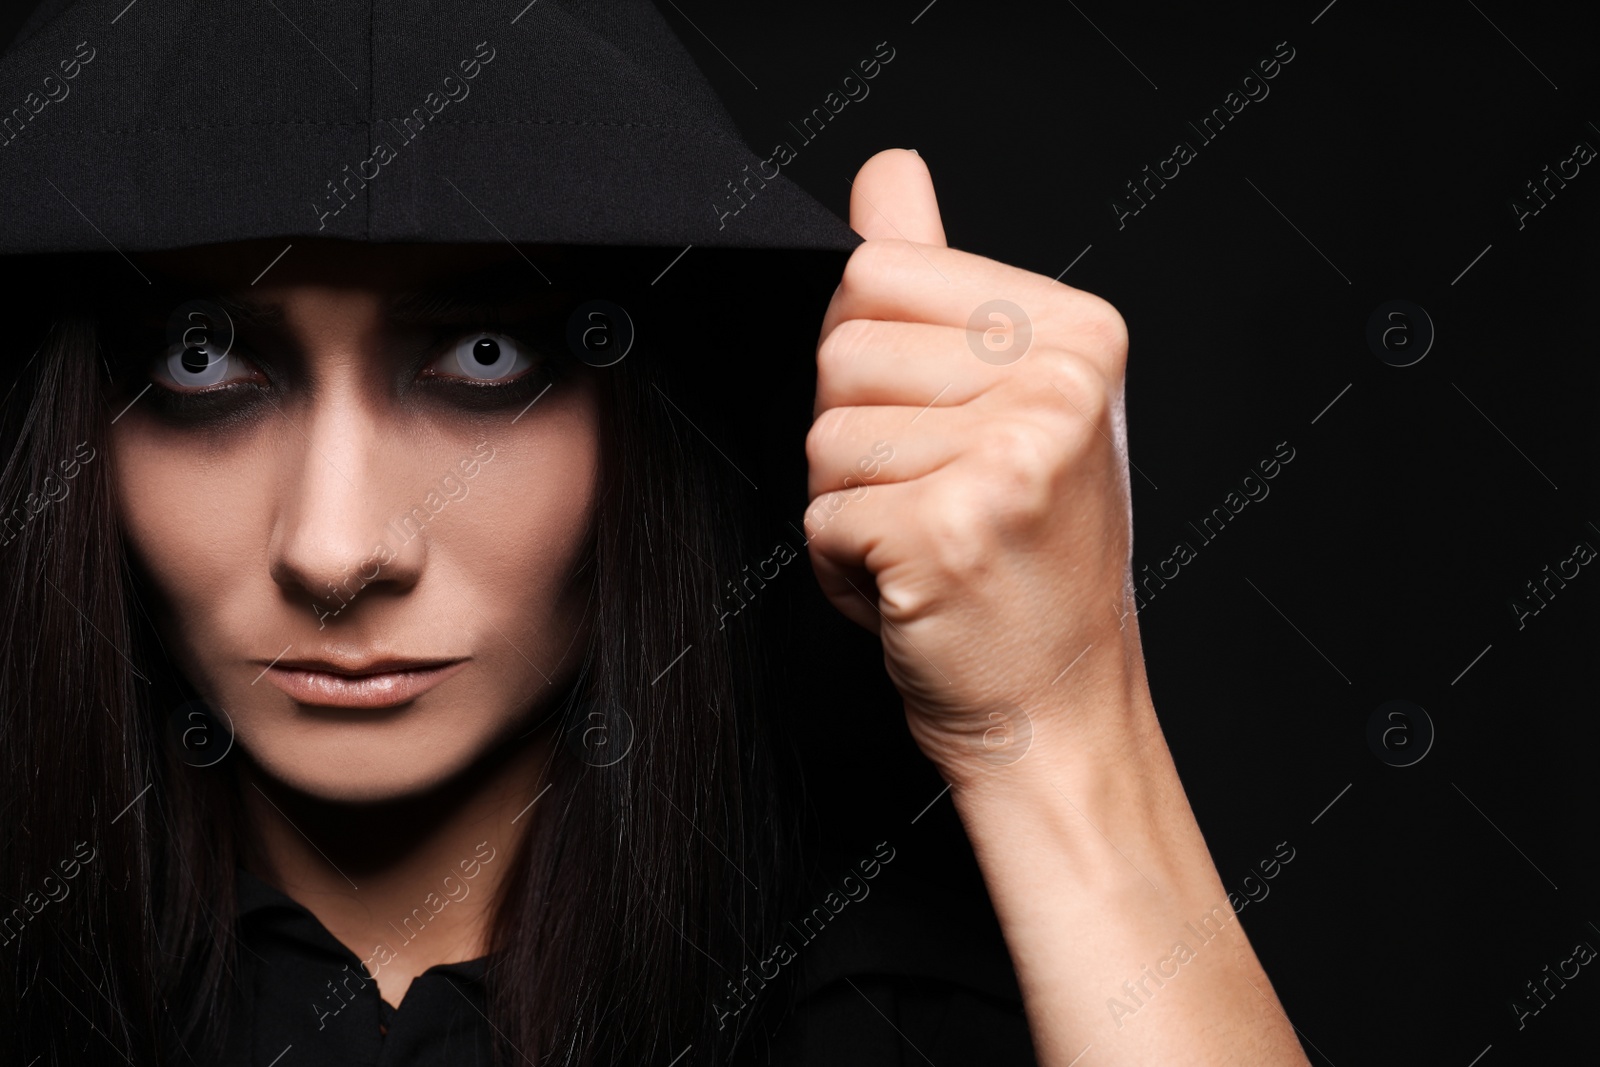 Photo of Mysterious witch with spooky eyes on black background, closeup